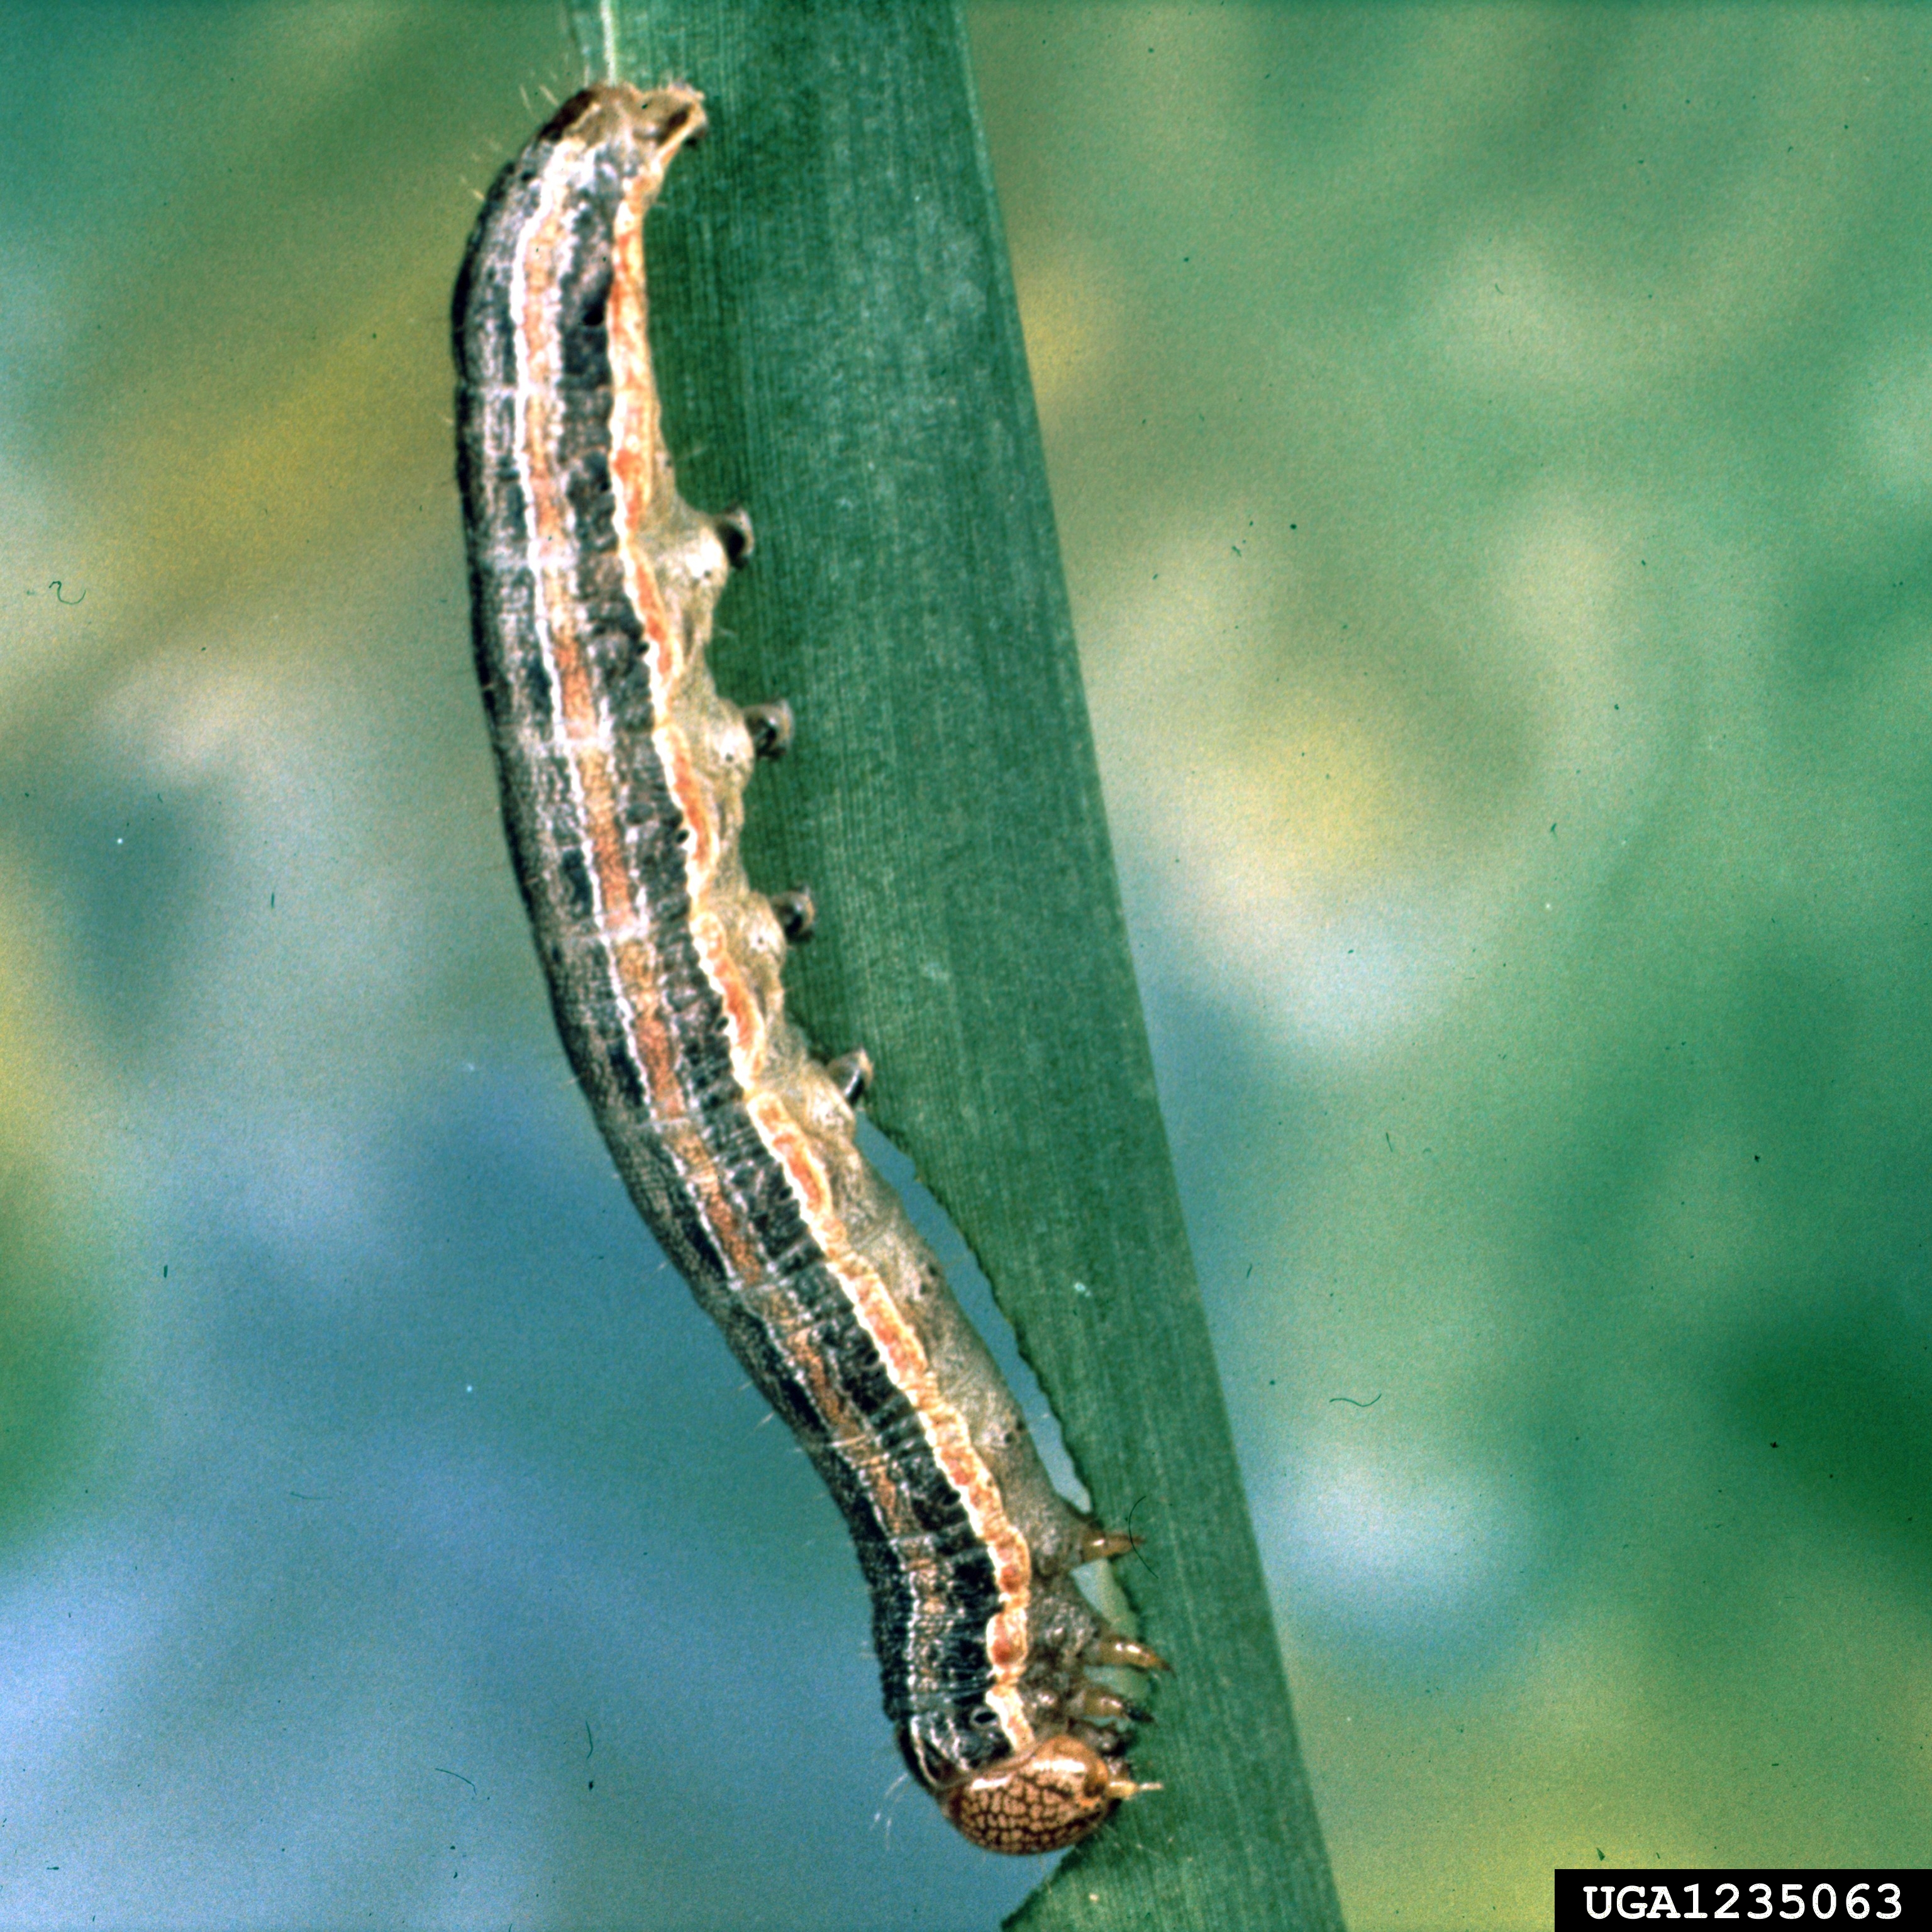 download army worm killer